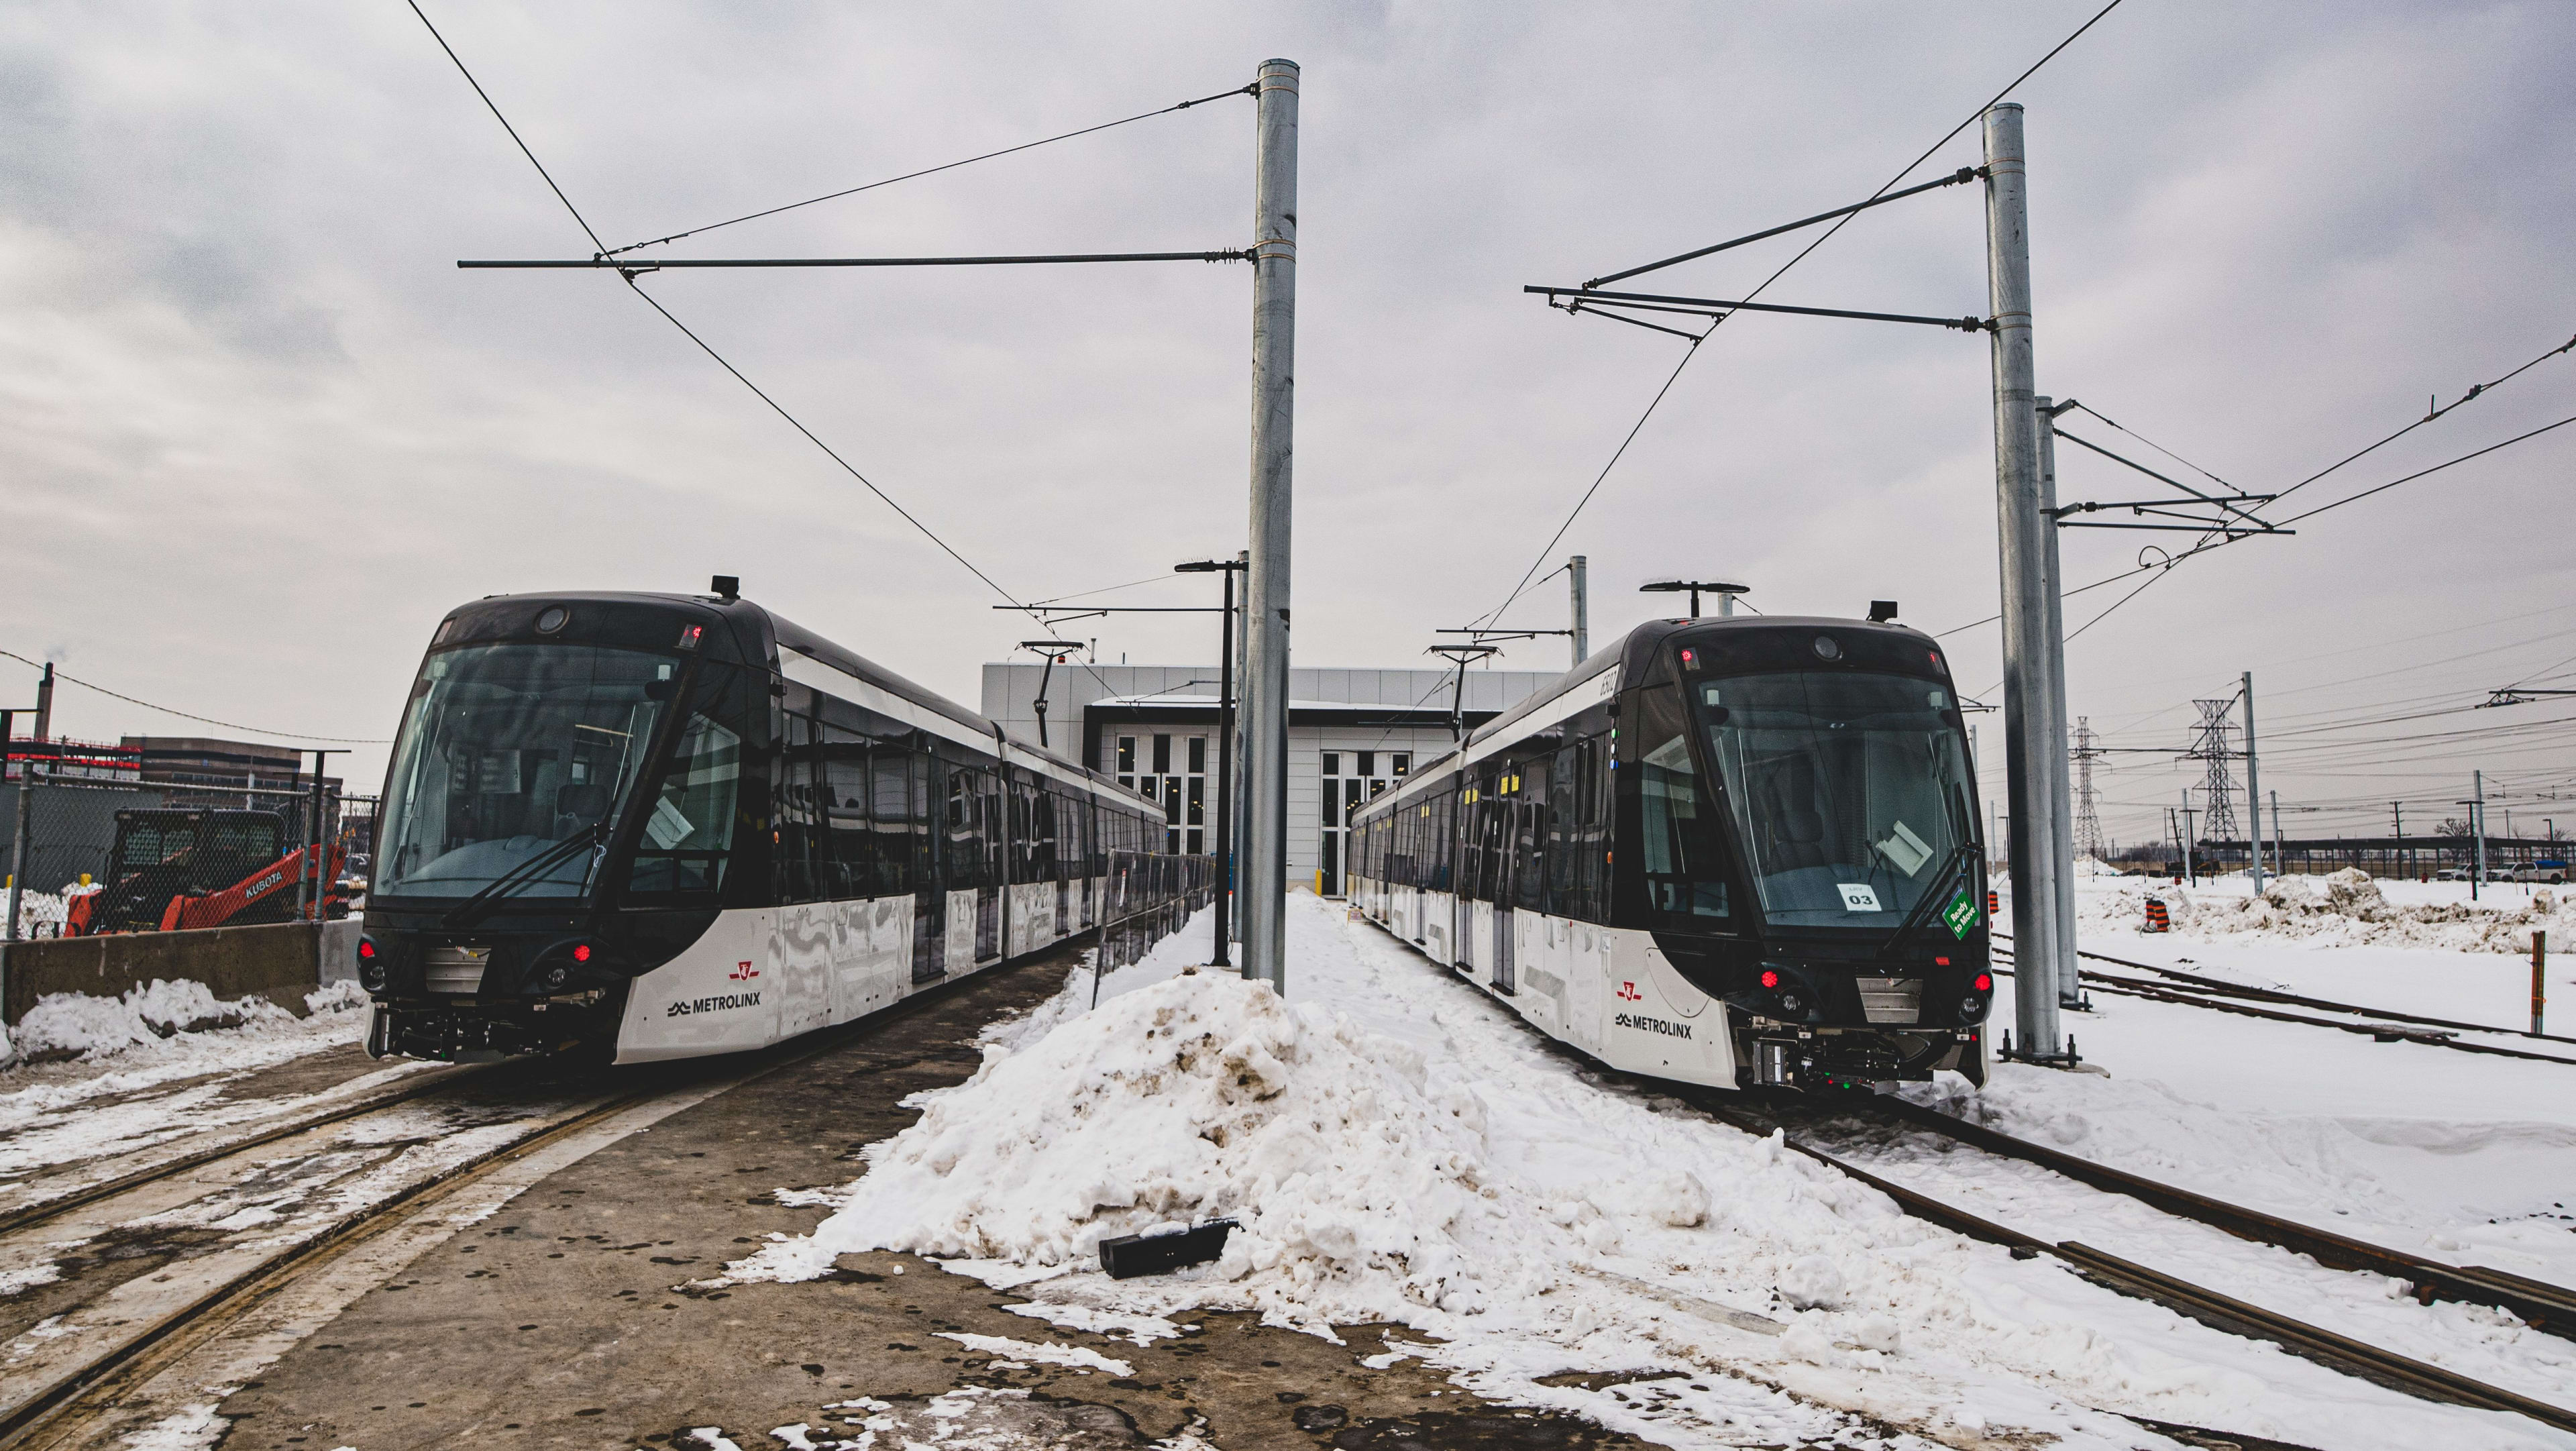 two LRVs in the yard being tested with snow on the ground